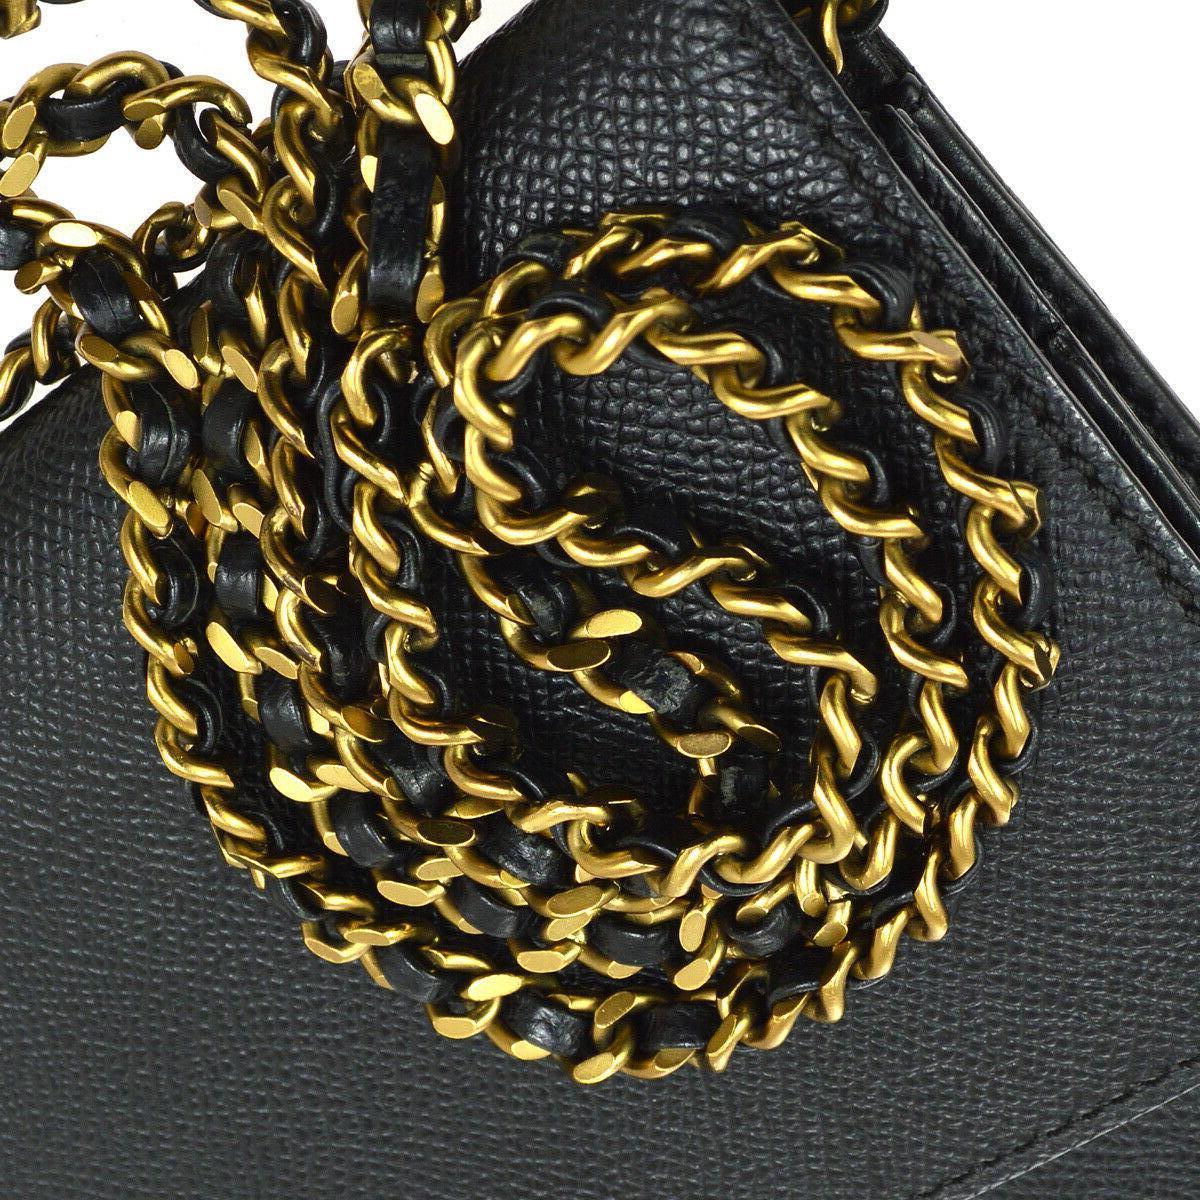 Chanel Black Leather Gold Wallet on Chain WOC Evening Shoulder Flap Bag

Caviar Leather
Gold tone hardware
Flip lock closure
Leather lining
Date code present
Shoulder strap 25